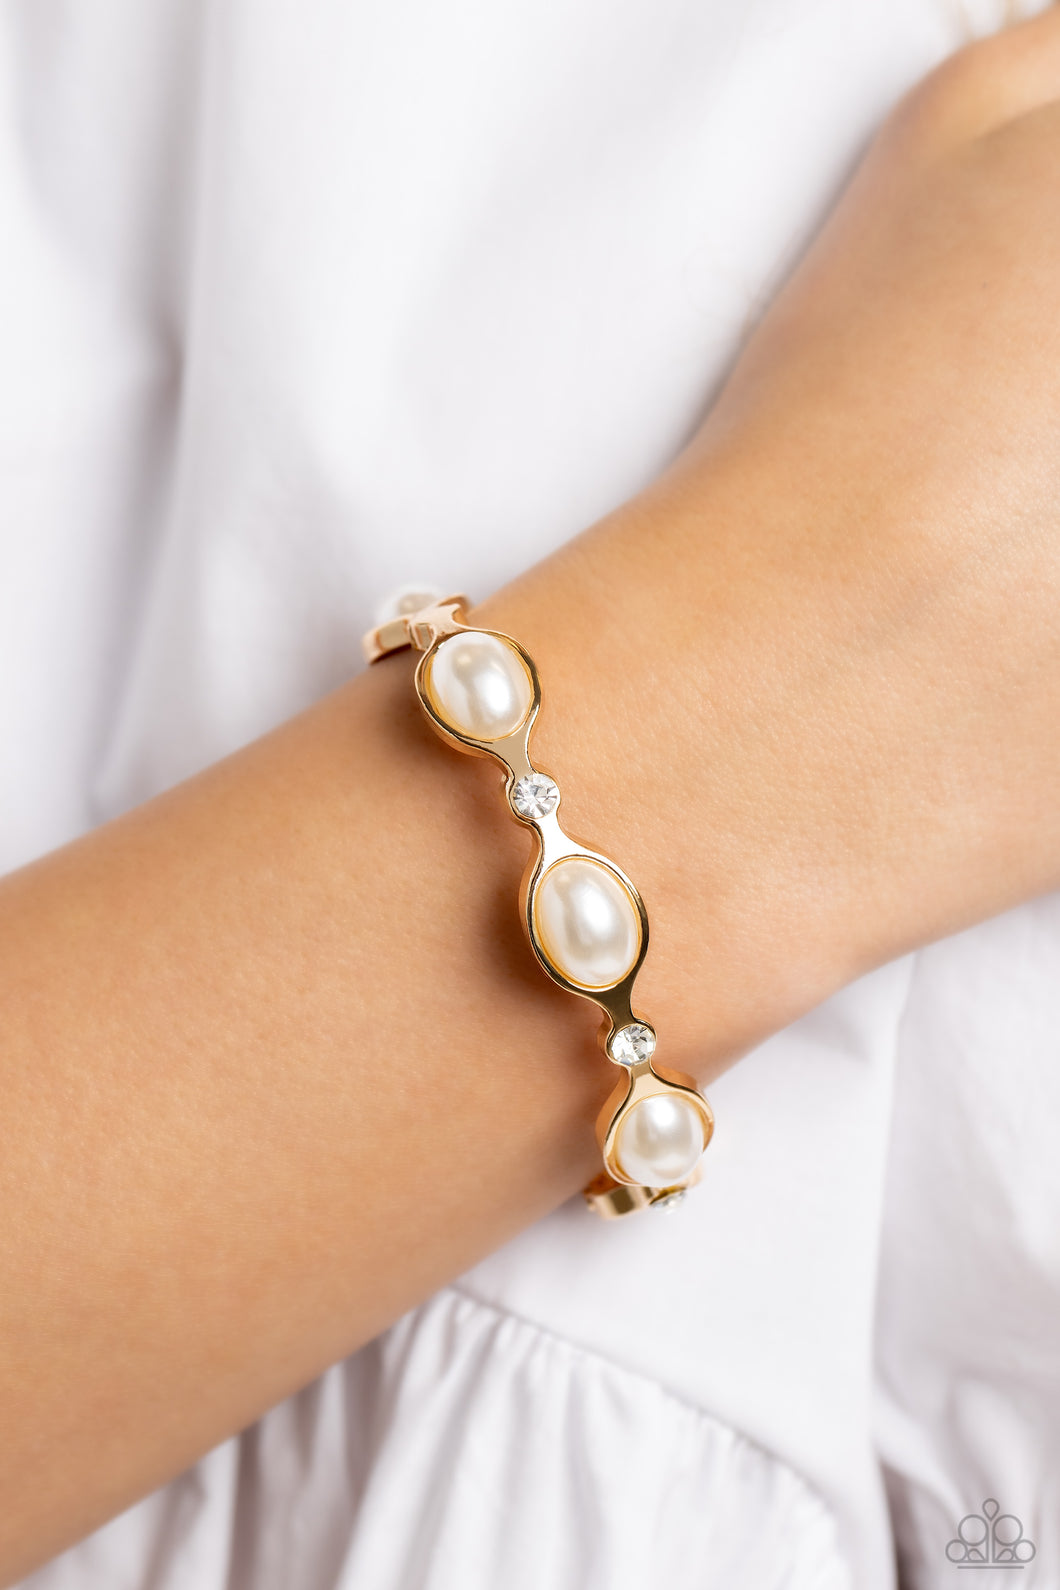 Paparazzi “Are You Gonna Be My PEARL?” Gold Hinge Bracelet